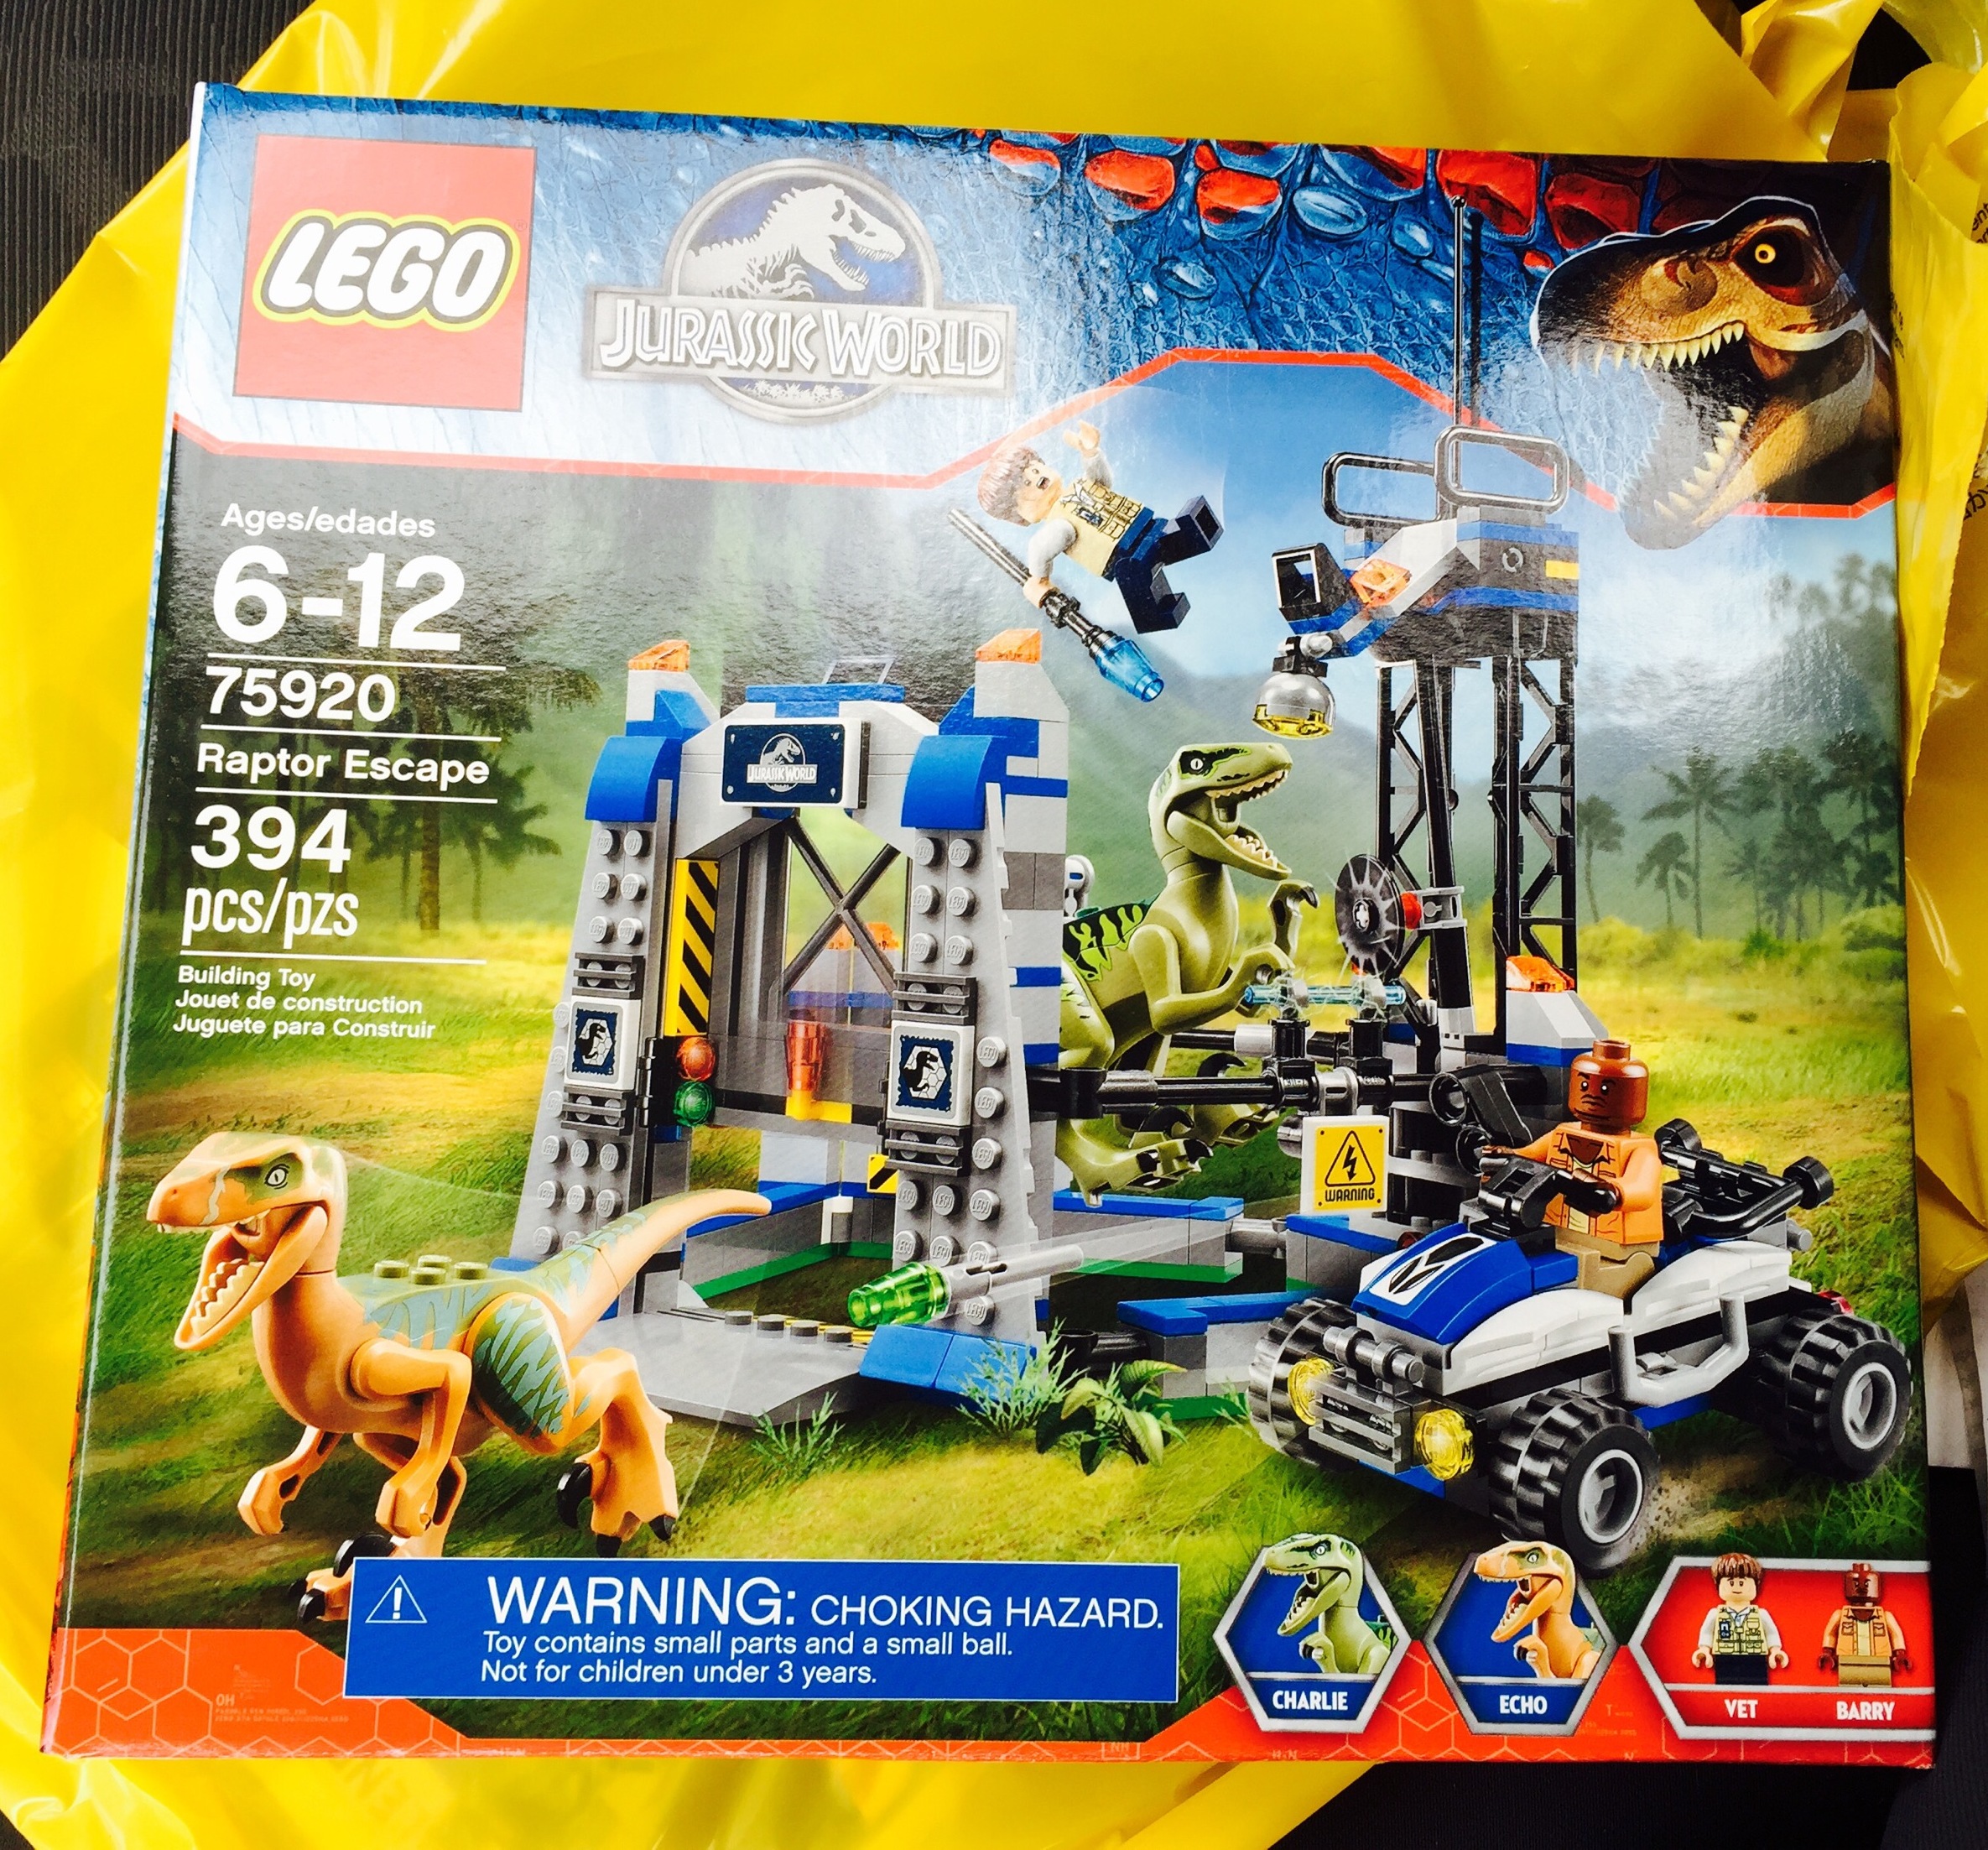 Lego Jurassic World Sets Released Online And In Stores Bricks And Bloks 